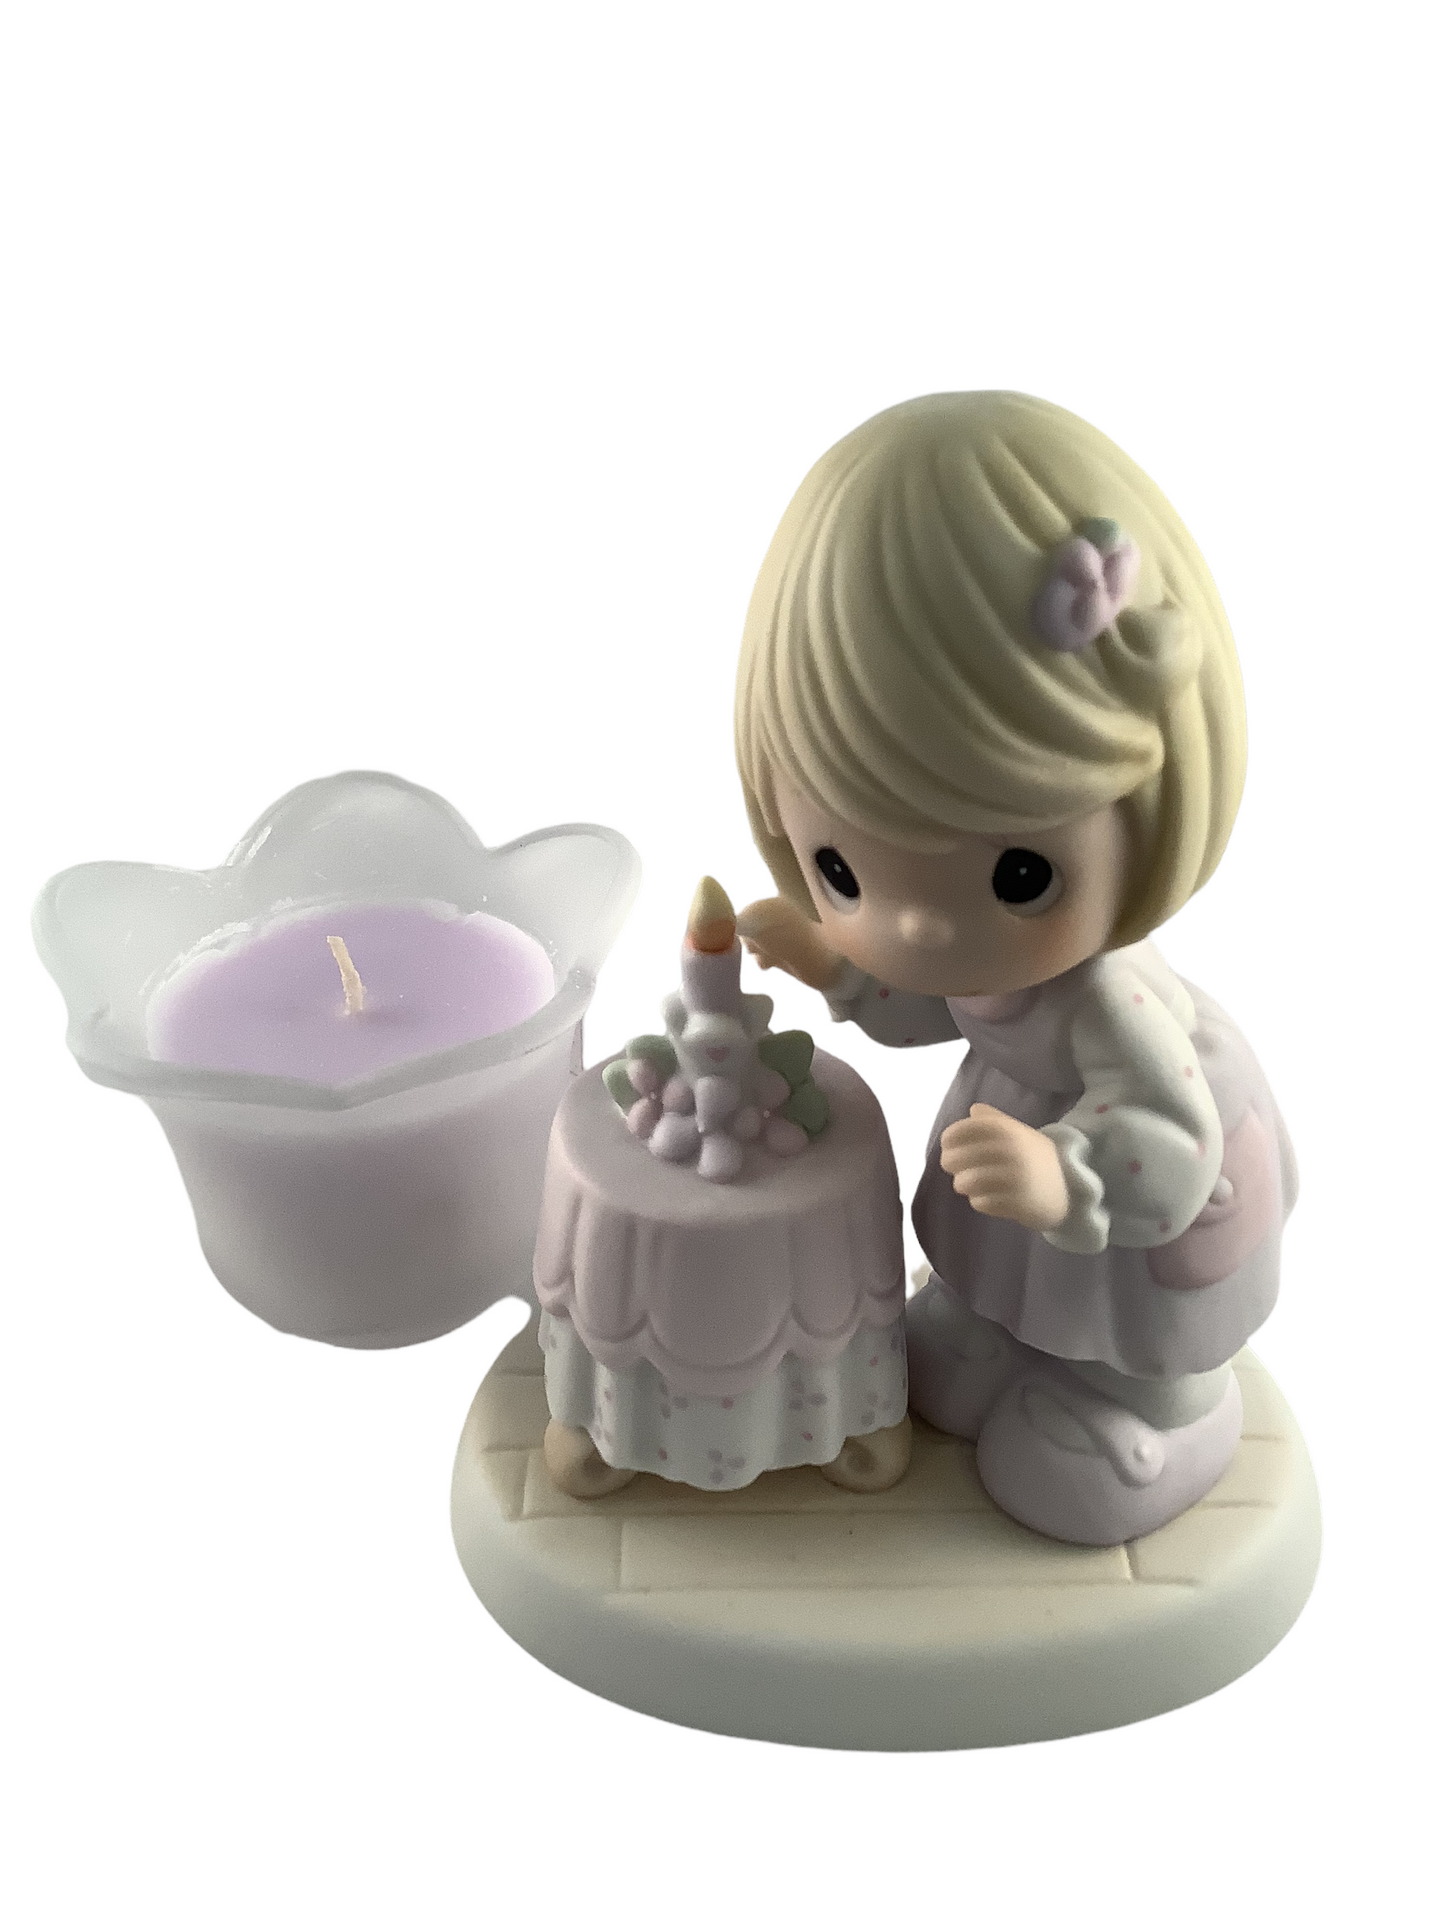 A Mother's Love Is A Warm Glow - Precious Moment Figurine